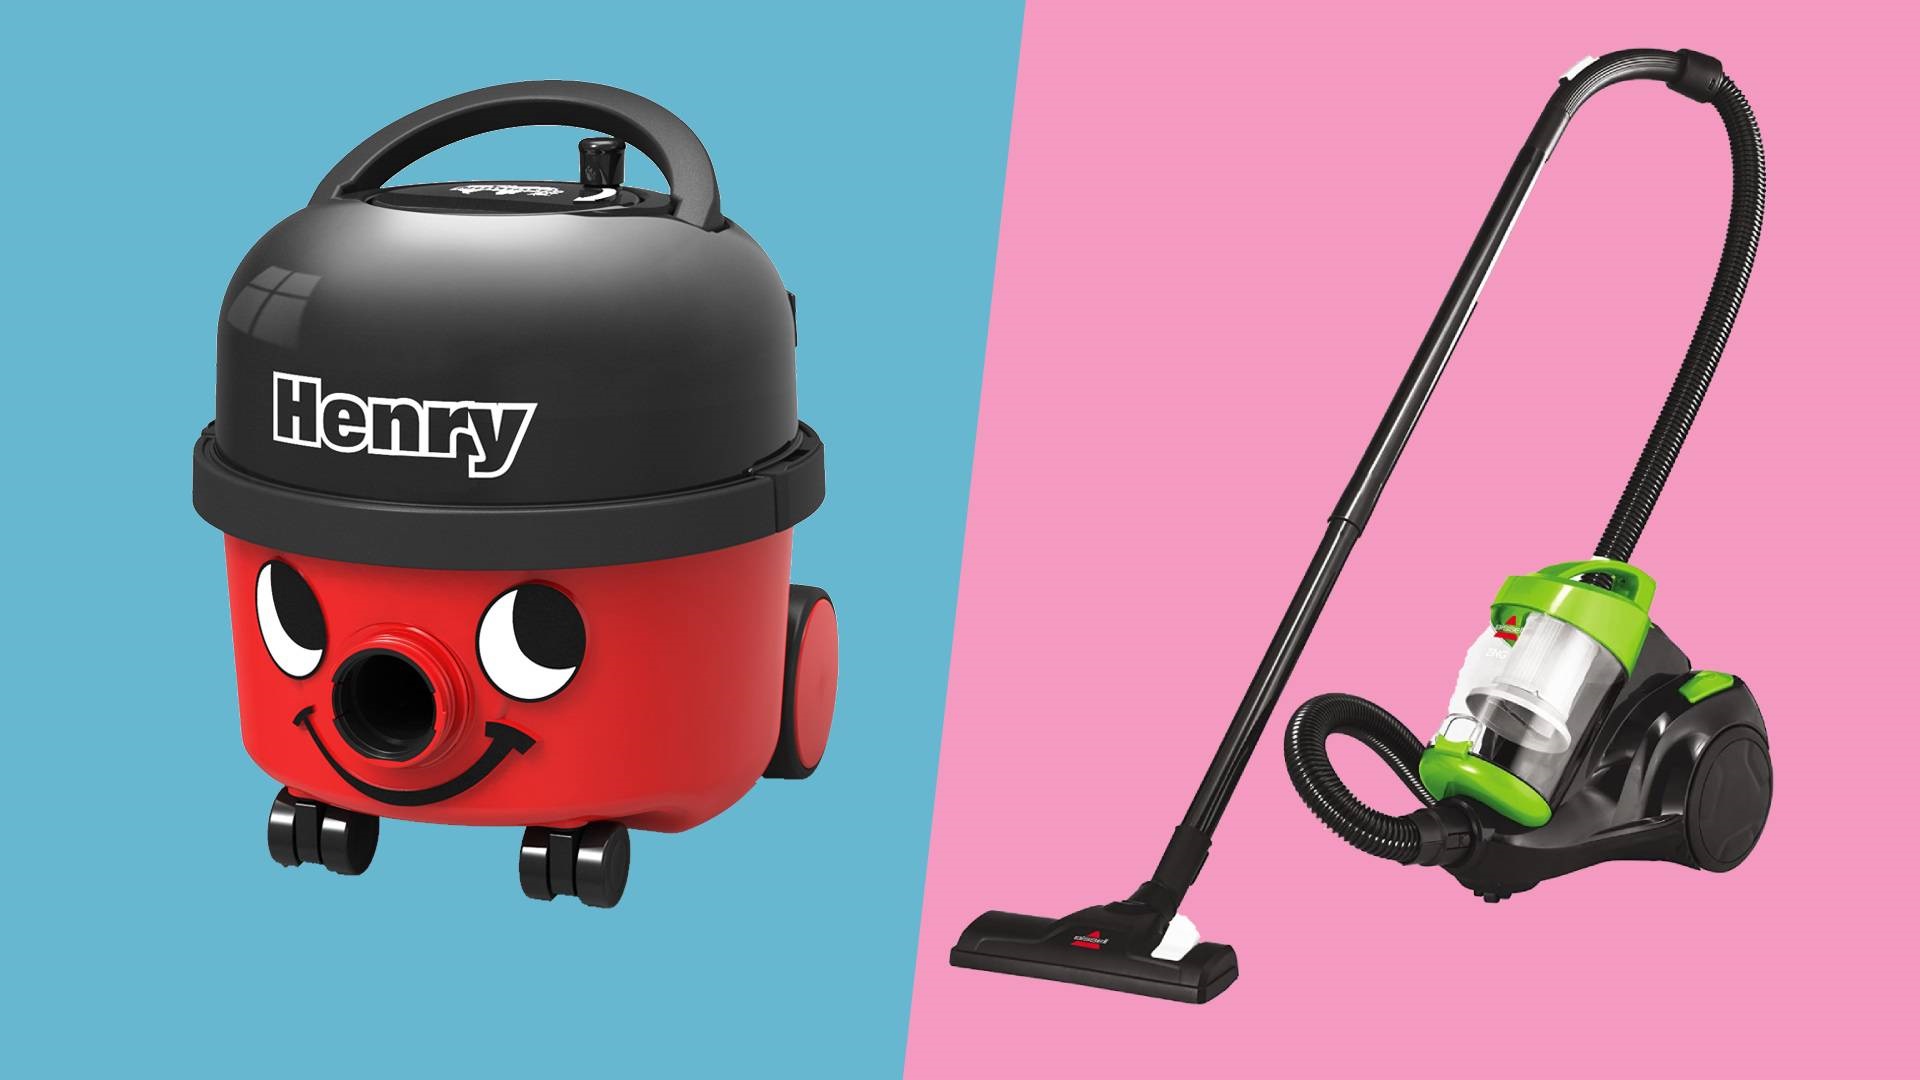 Bagged vs Bagless Vacuum: Which Is Better?